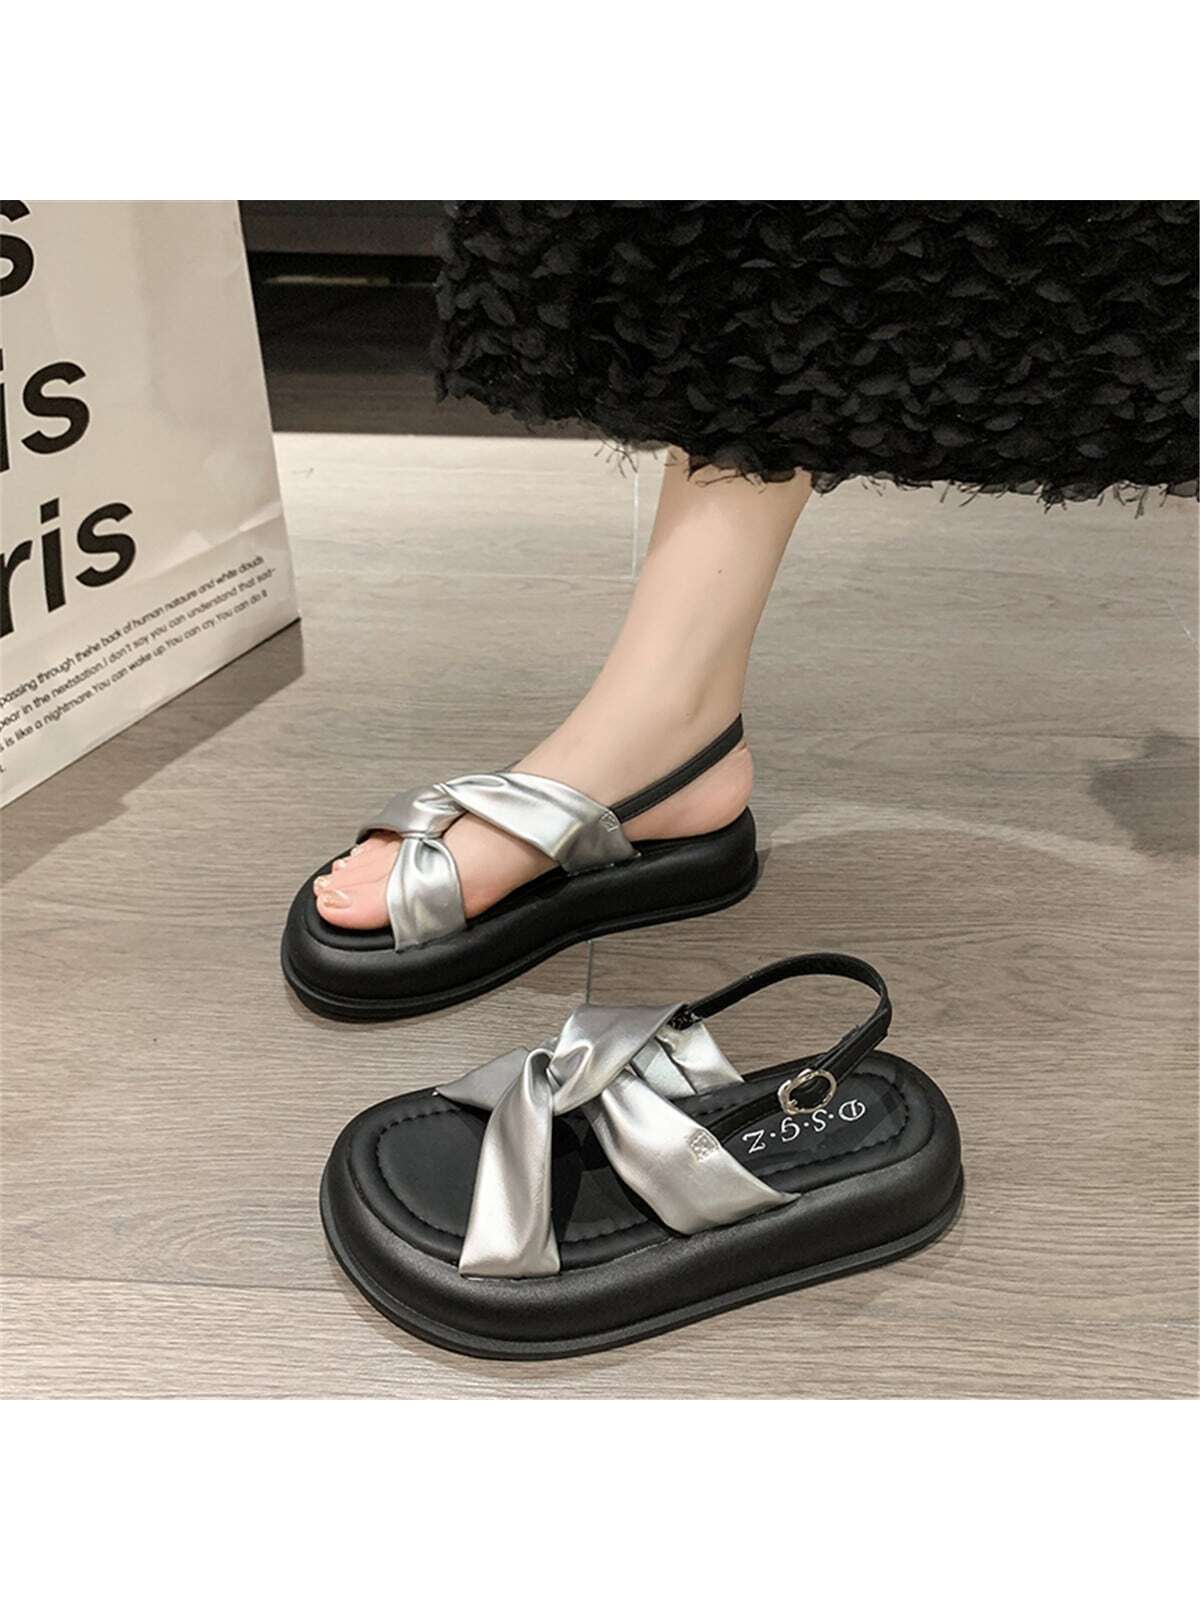 1pair Cross Strap Sandals With Ankle Strap And Thick Sole, For Beaches-Silver-1